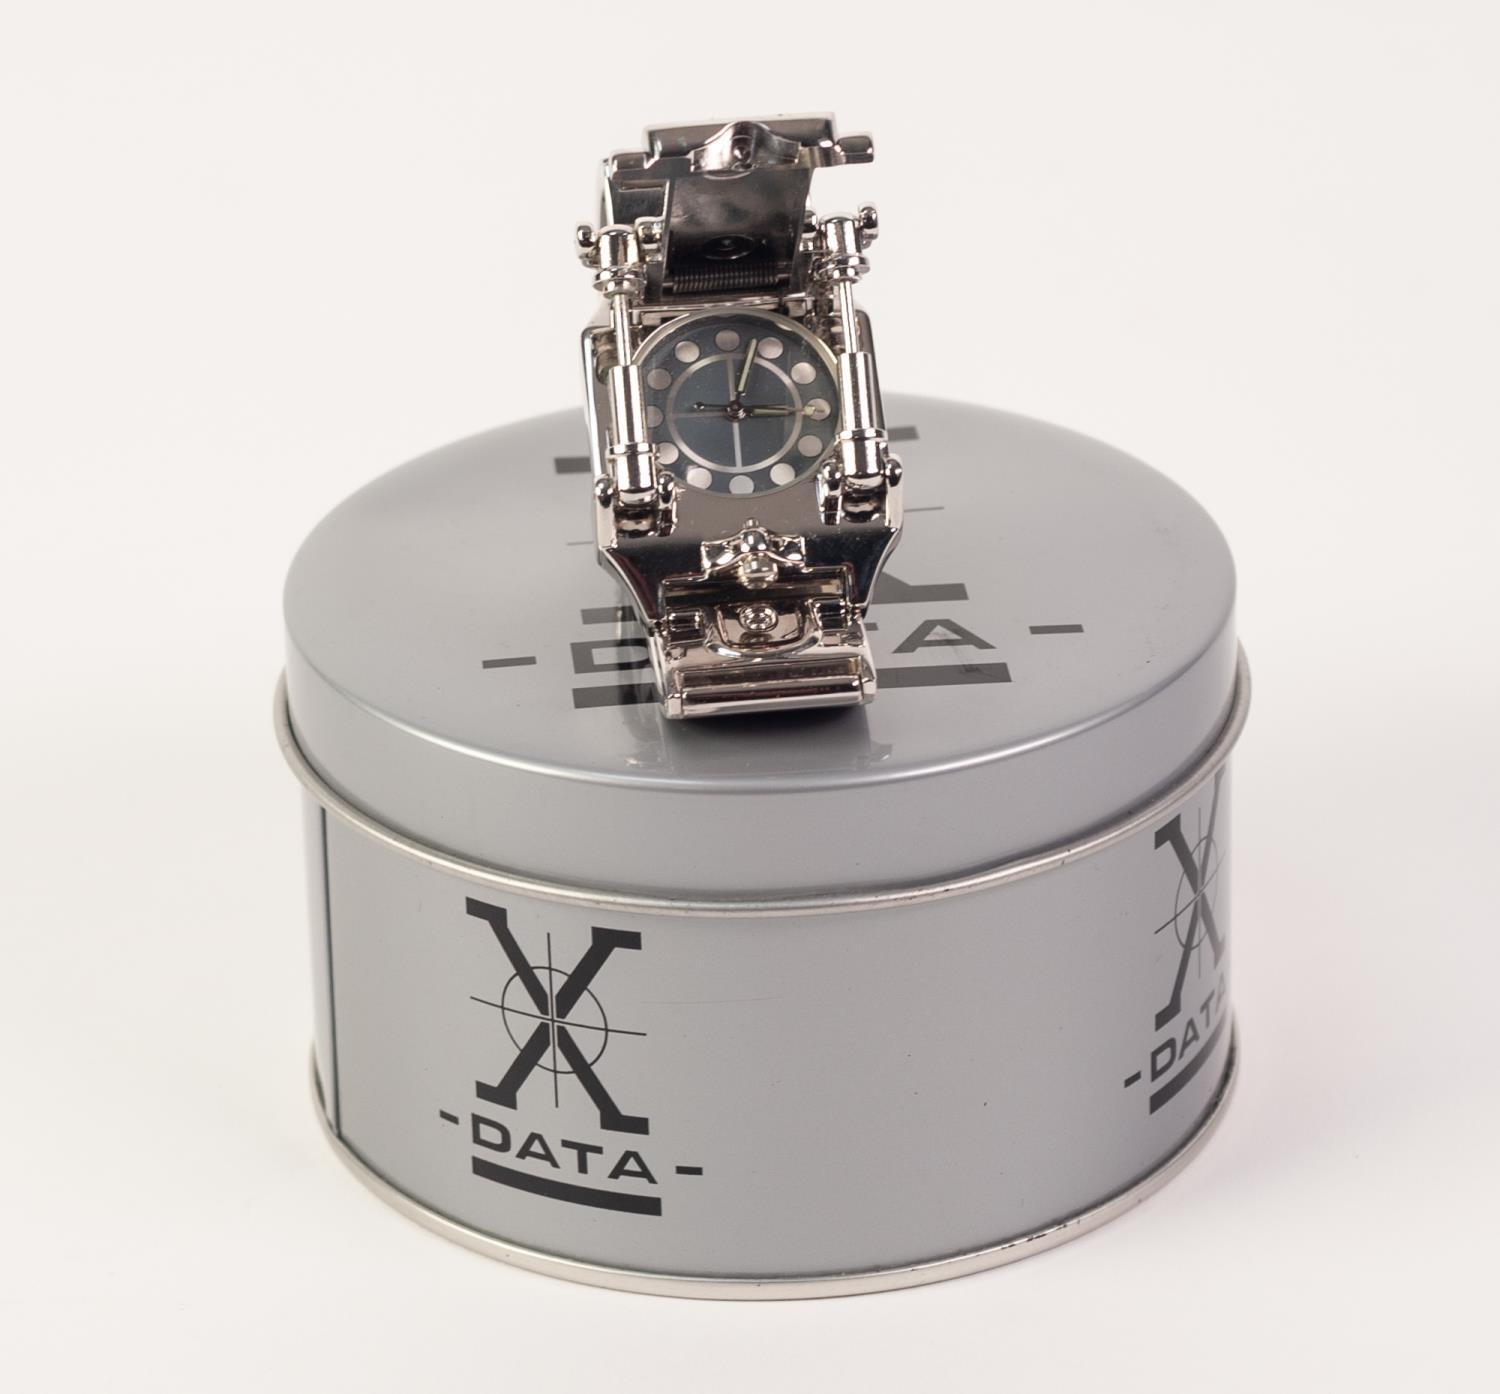 AN X DATA STAINLESS STEEL WRIST WATCH (as new) in original metal box - Image 2 of 2